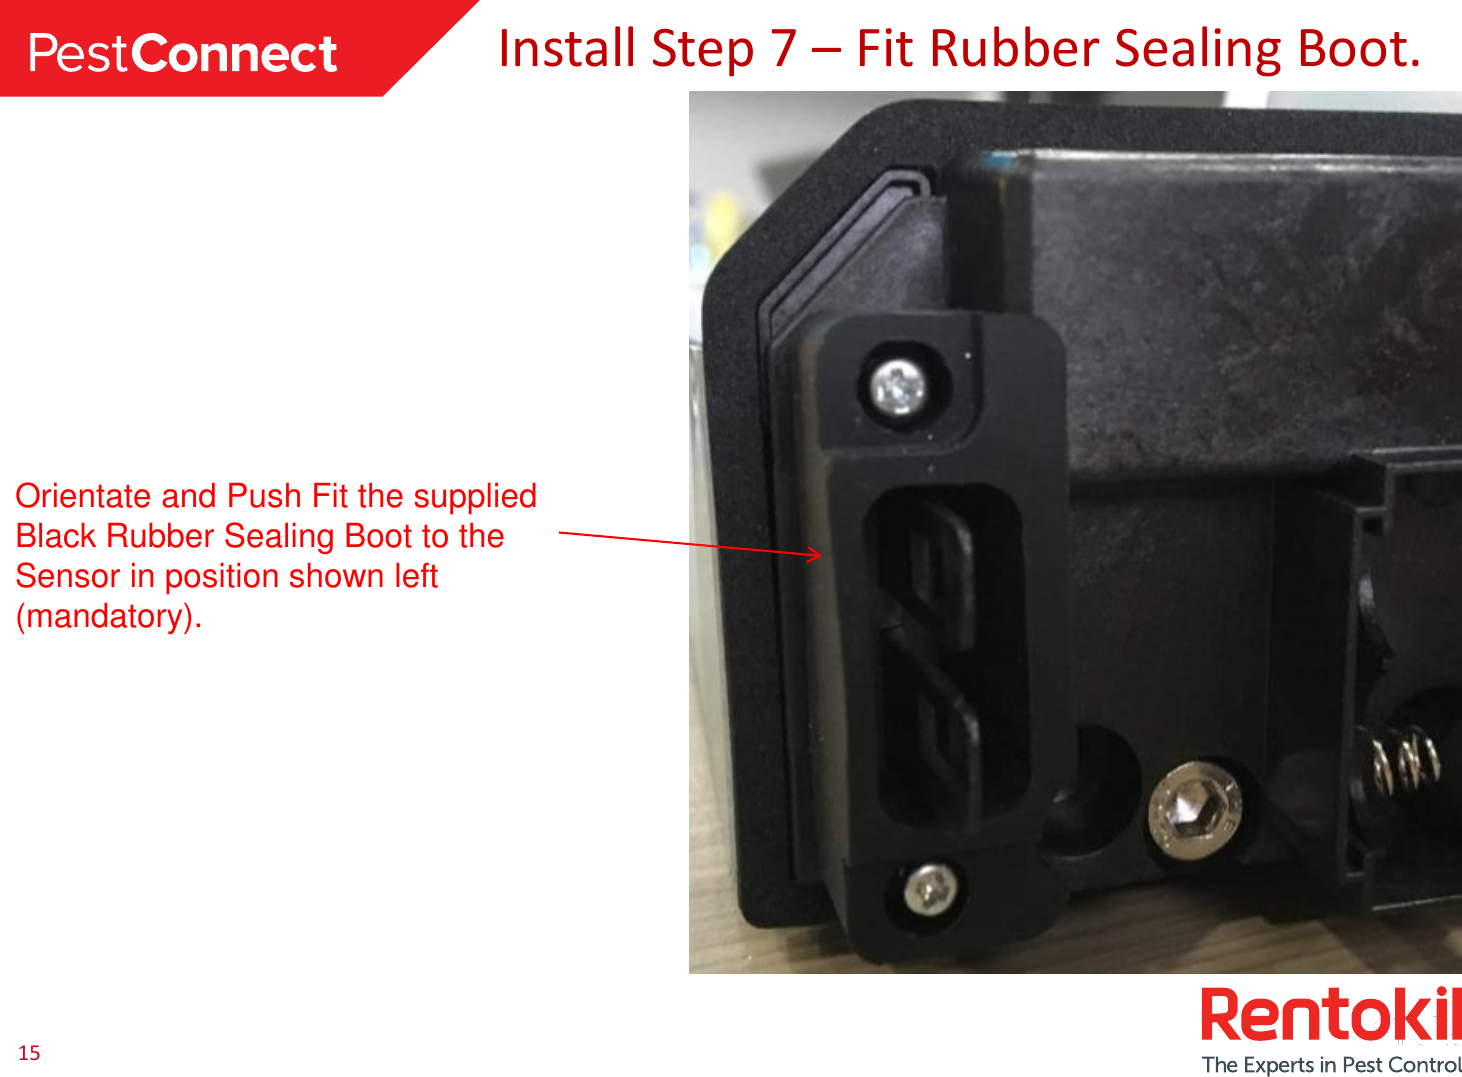 15Install Step 7 –Fit Rubber Sealing Boot.Orientate and Push Fit the supplied Black Rubber Sealing Boot to the Sensor in position shown left (mandatory).